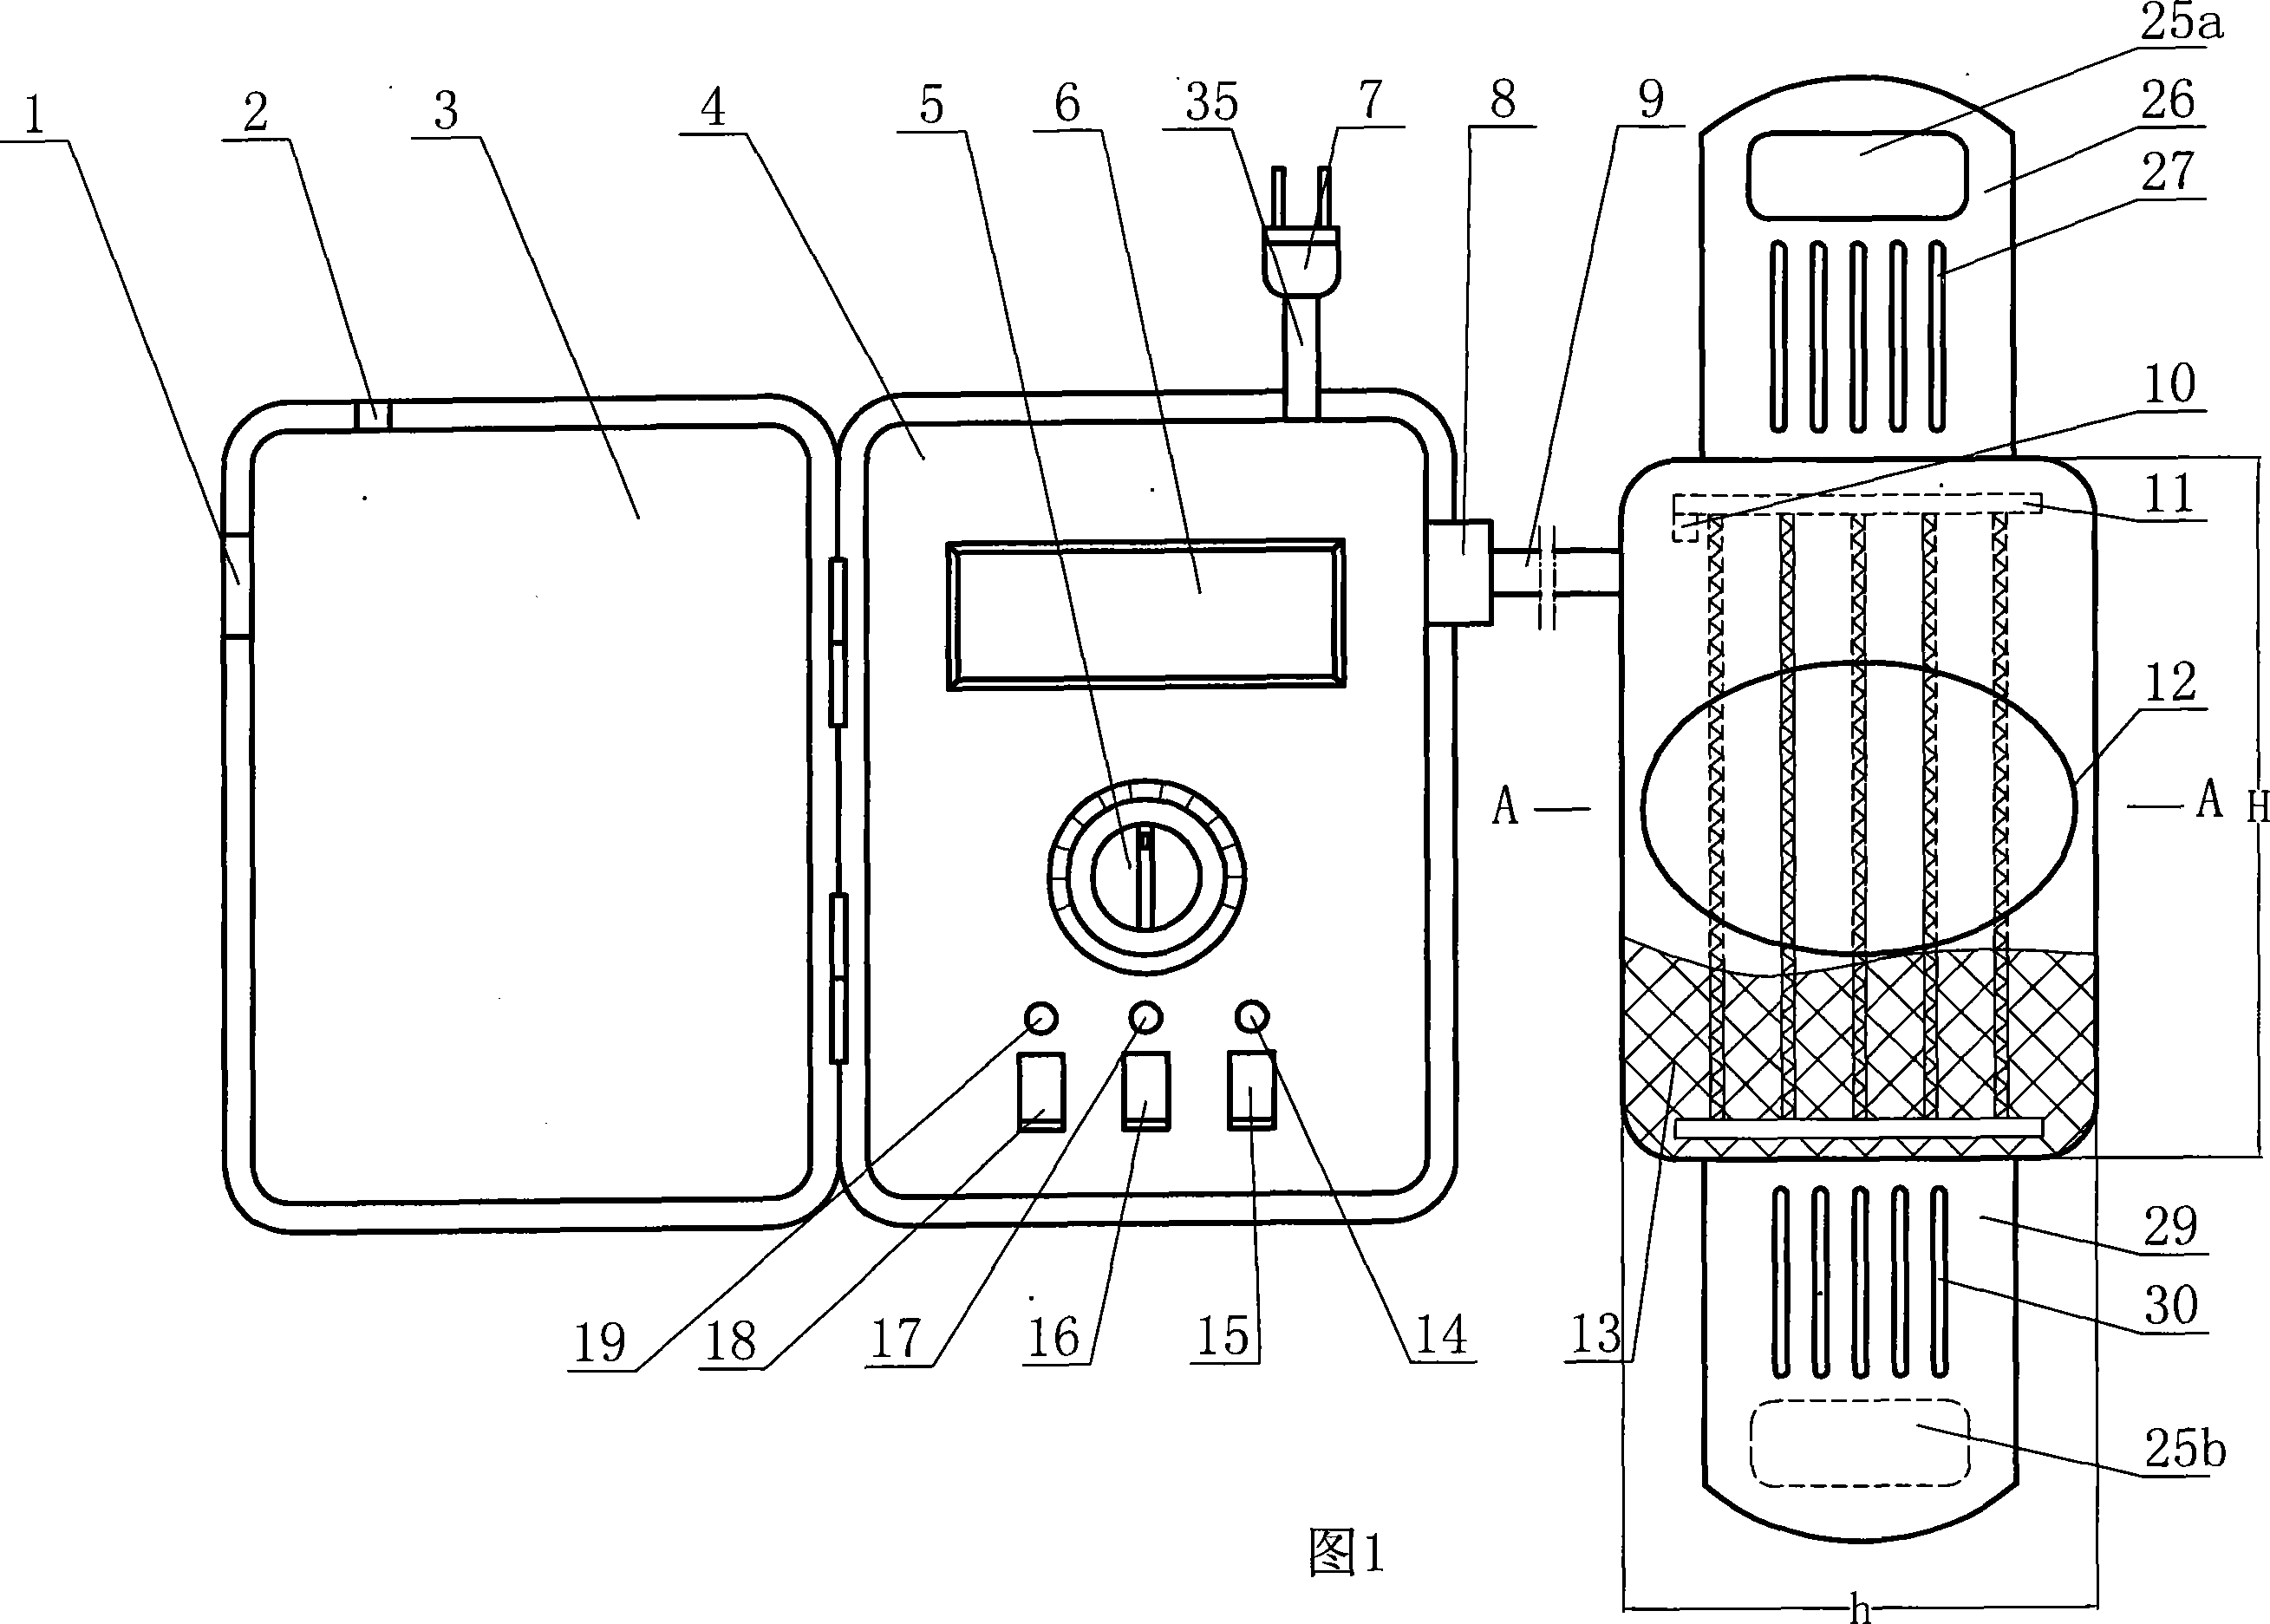 Male electro-heat constant temperature contraceptive device for external application